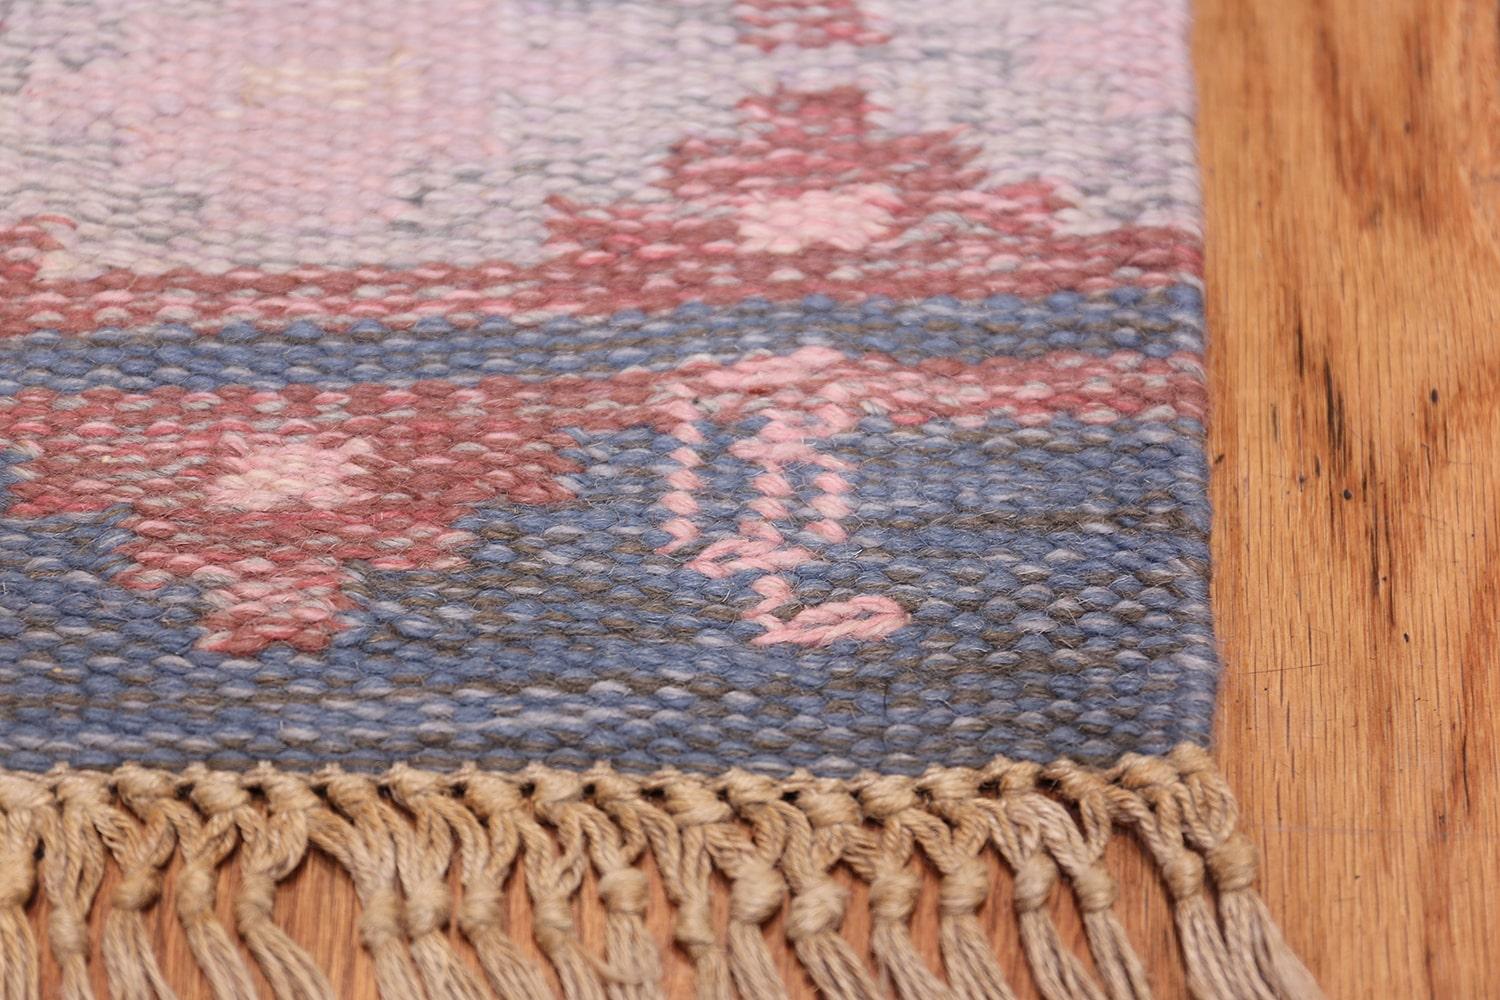 Vintage Swedish Flat-Woven Kilim. Size: 4 ft 5 in x 6 ft 8 in (1.35 m x 2.03 m) 2